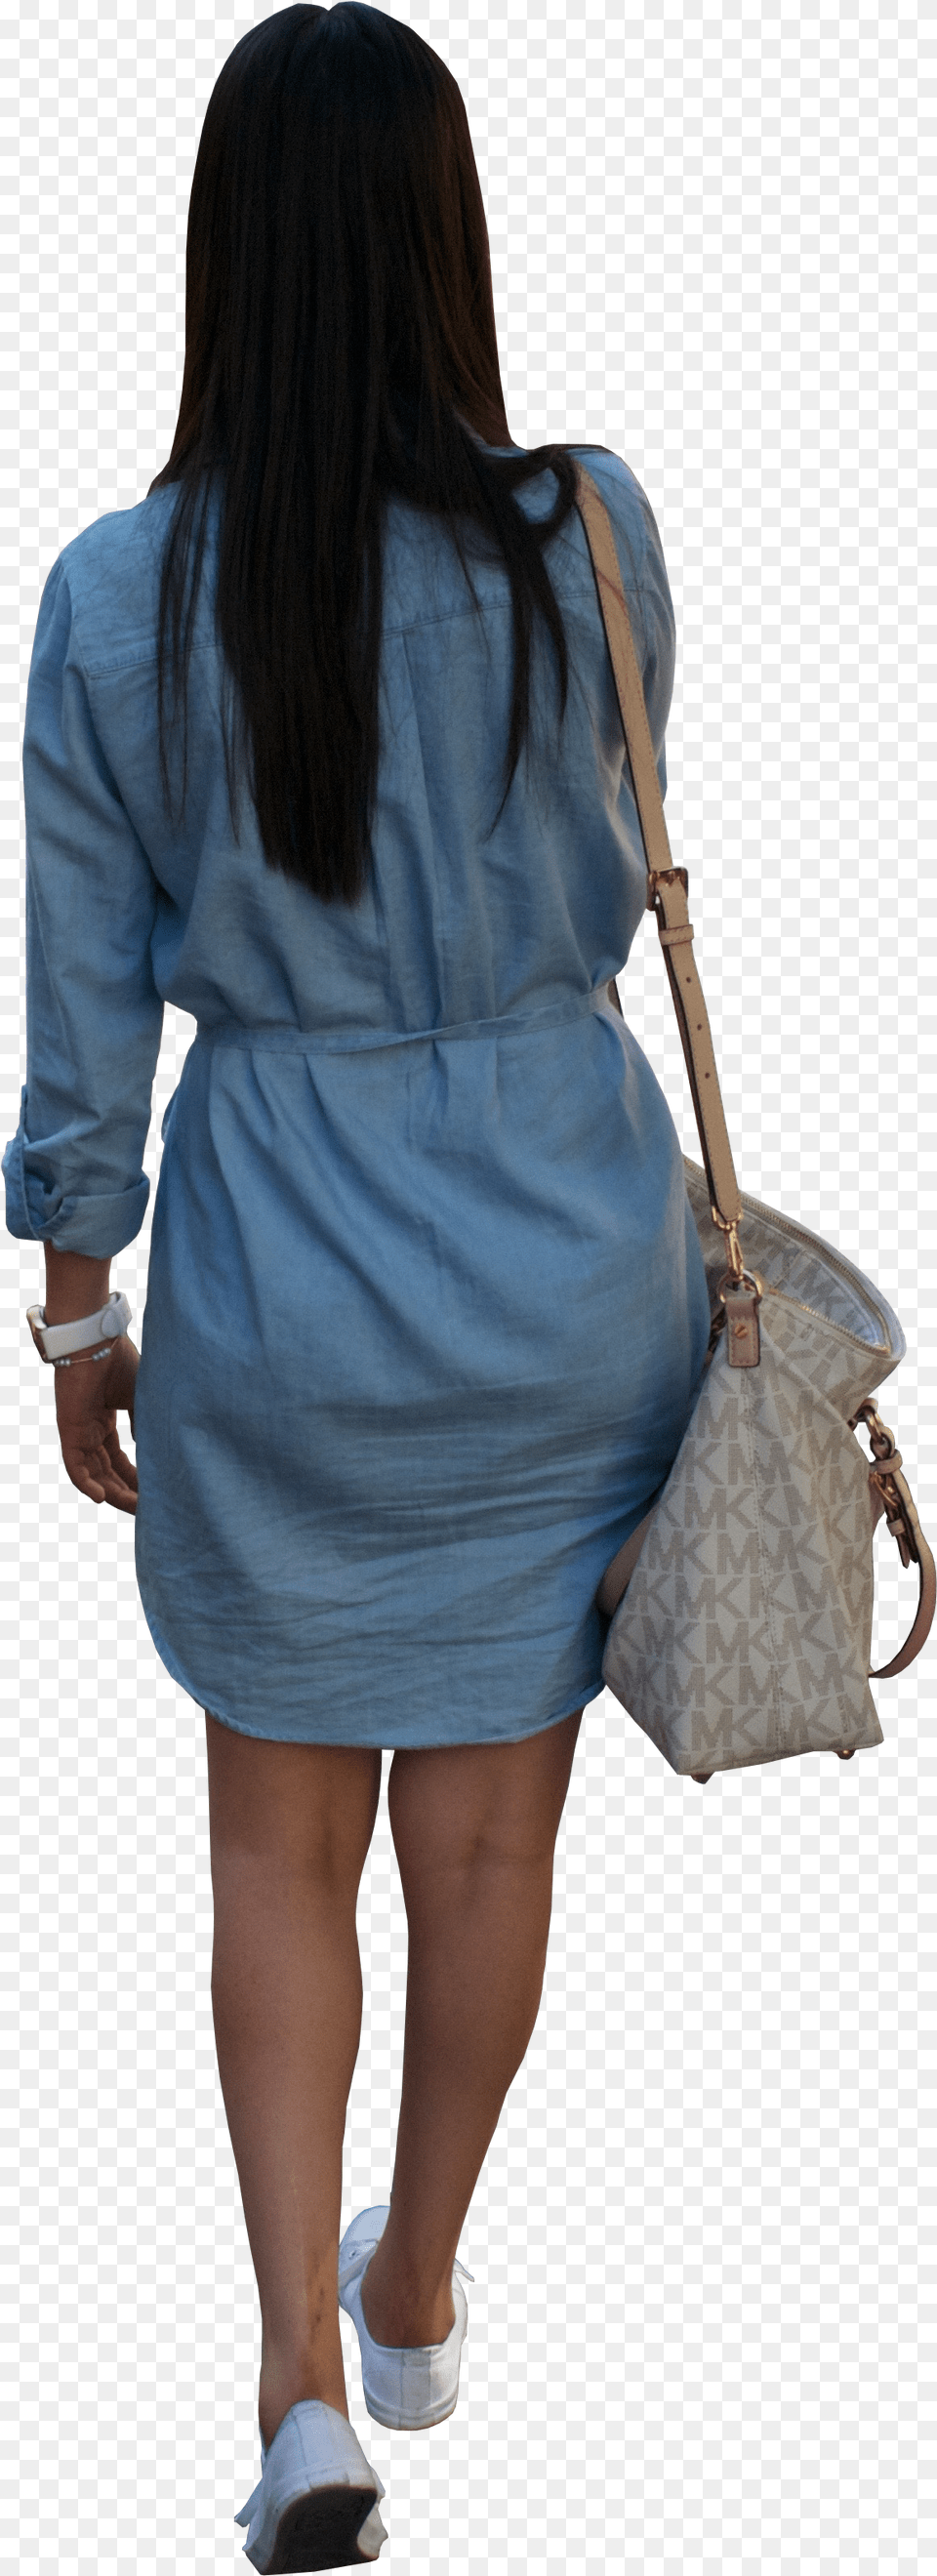 Editing Backgrounds Girls, Accessories, Sleeve, Shoe, Purse Free Transparent Png